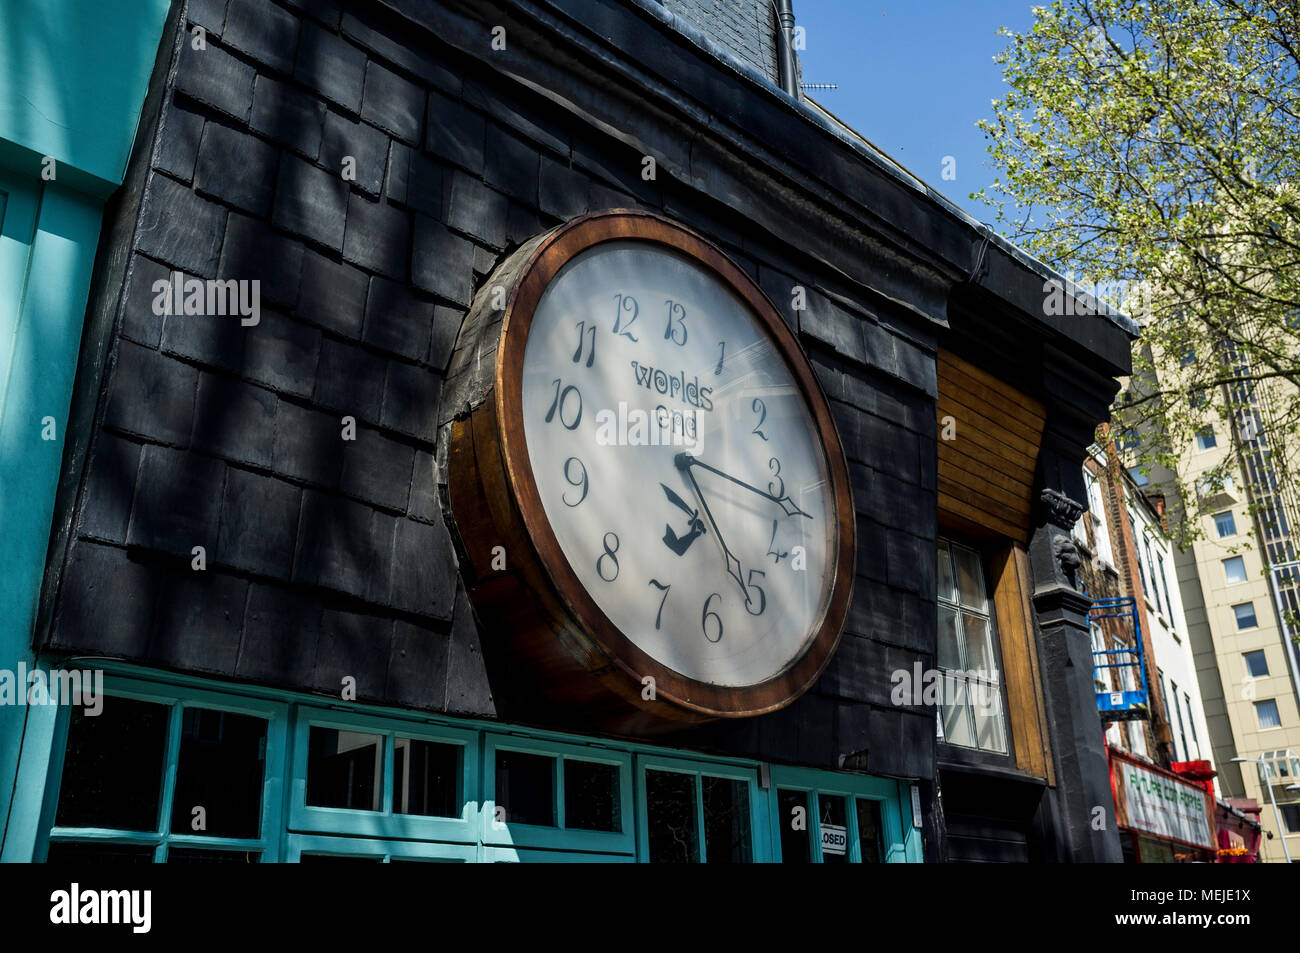 Clock at World's End, London Stock Photo